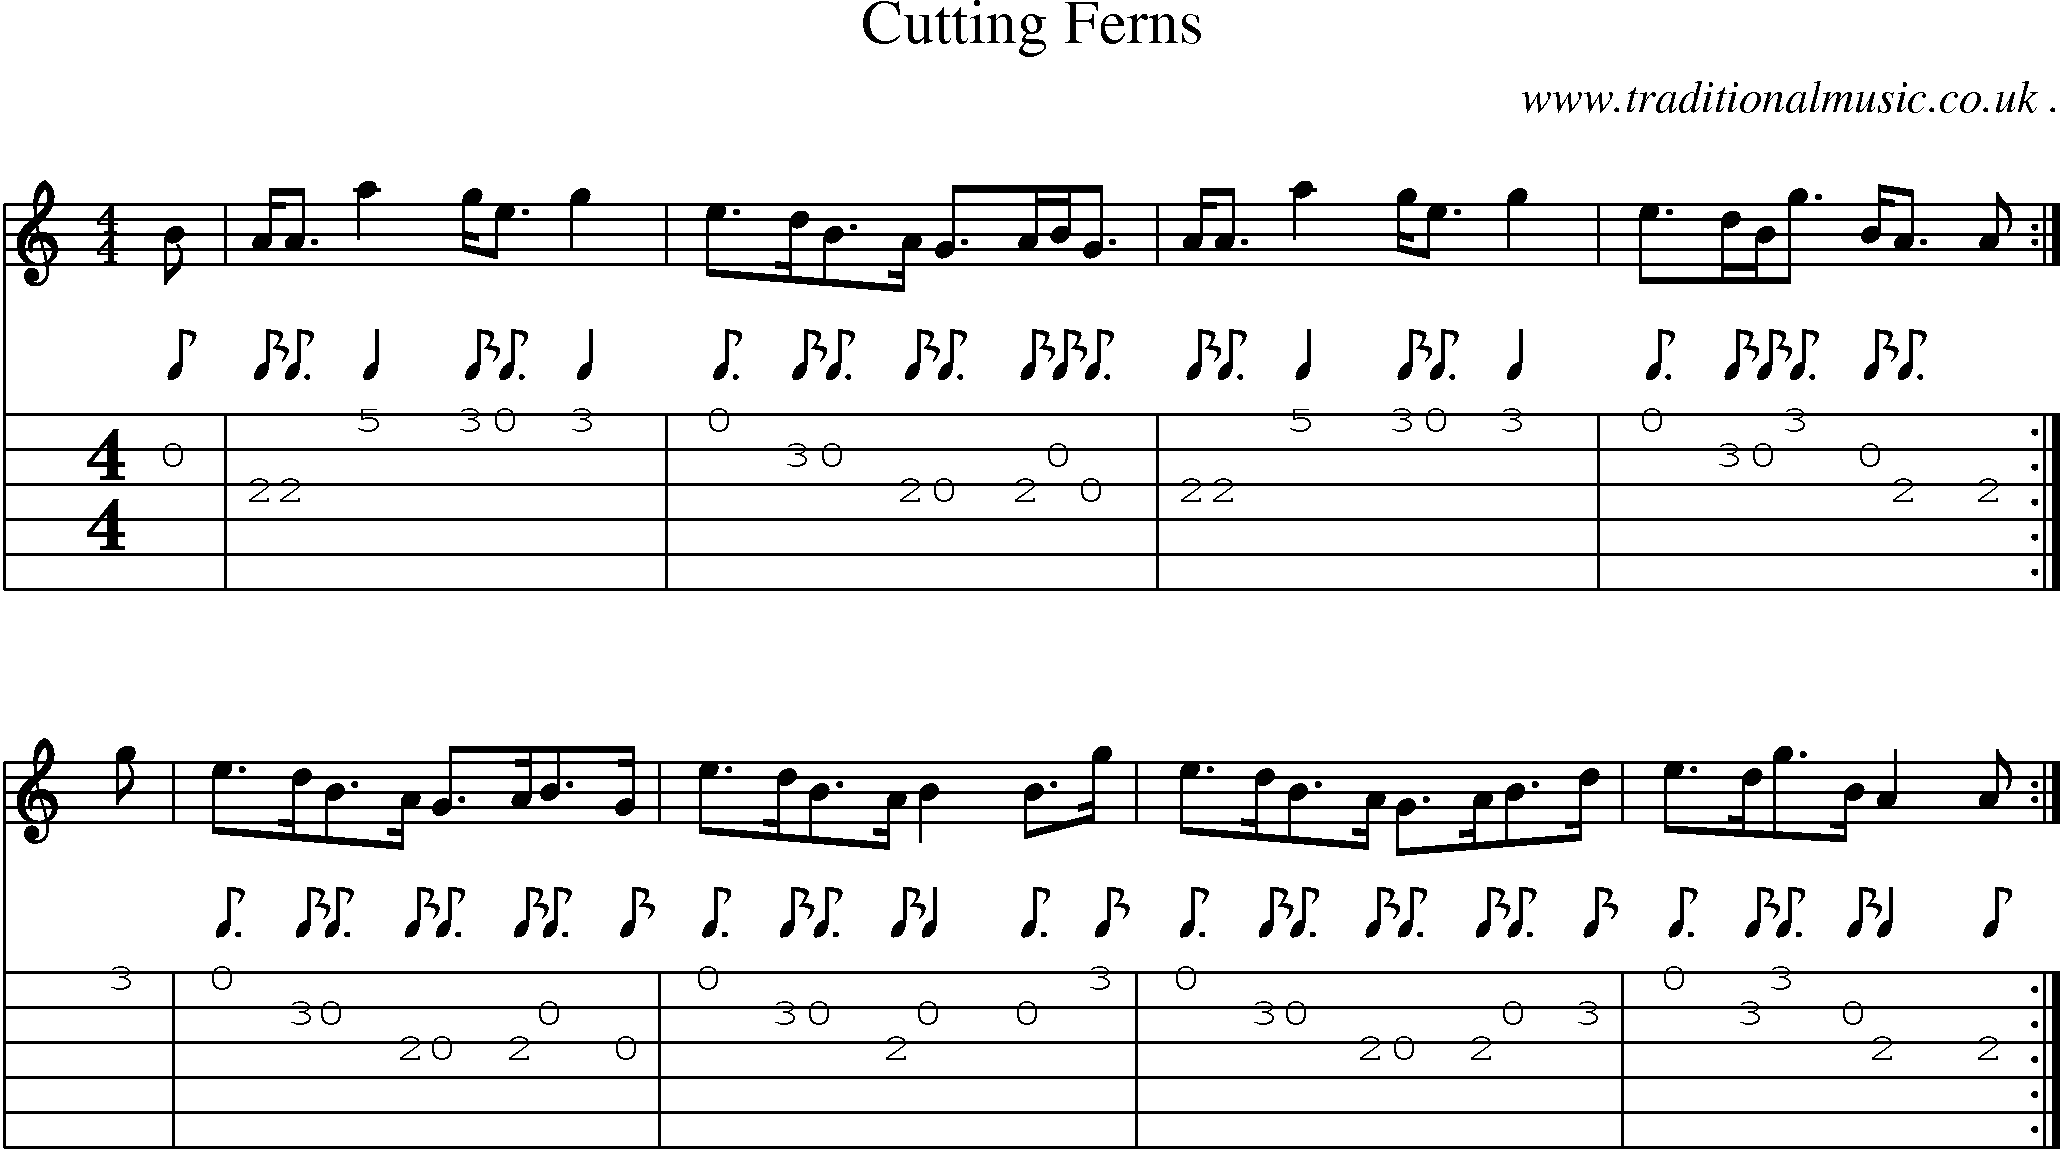 Music Score and Guitar Tabs for Cutting Ferns